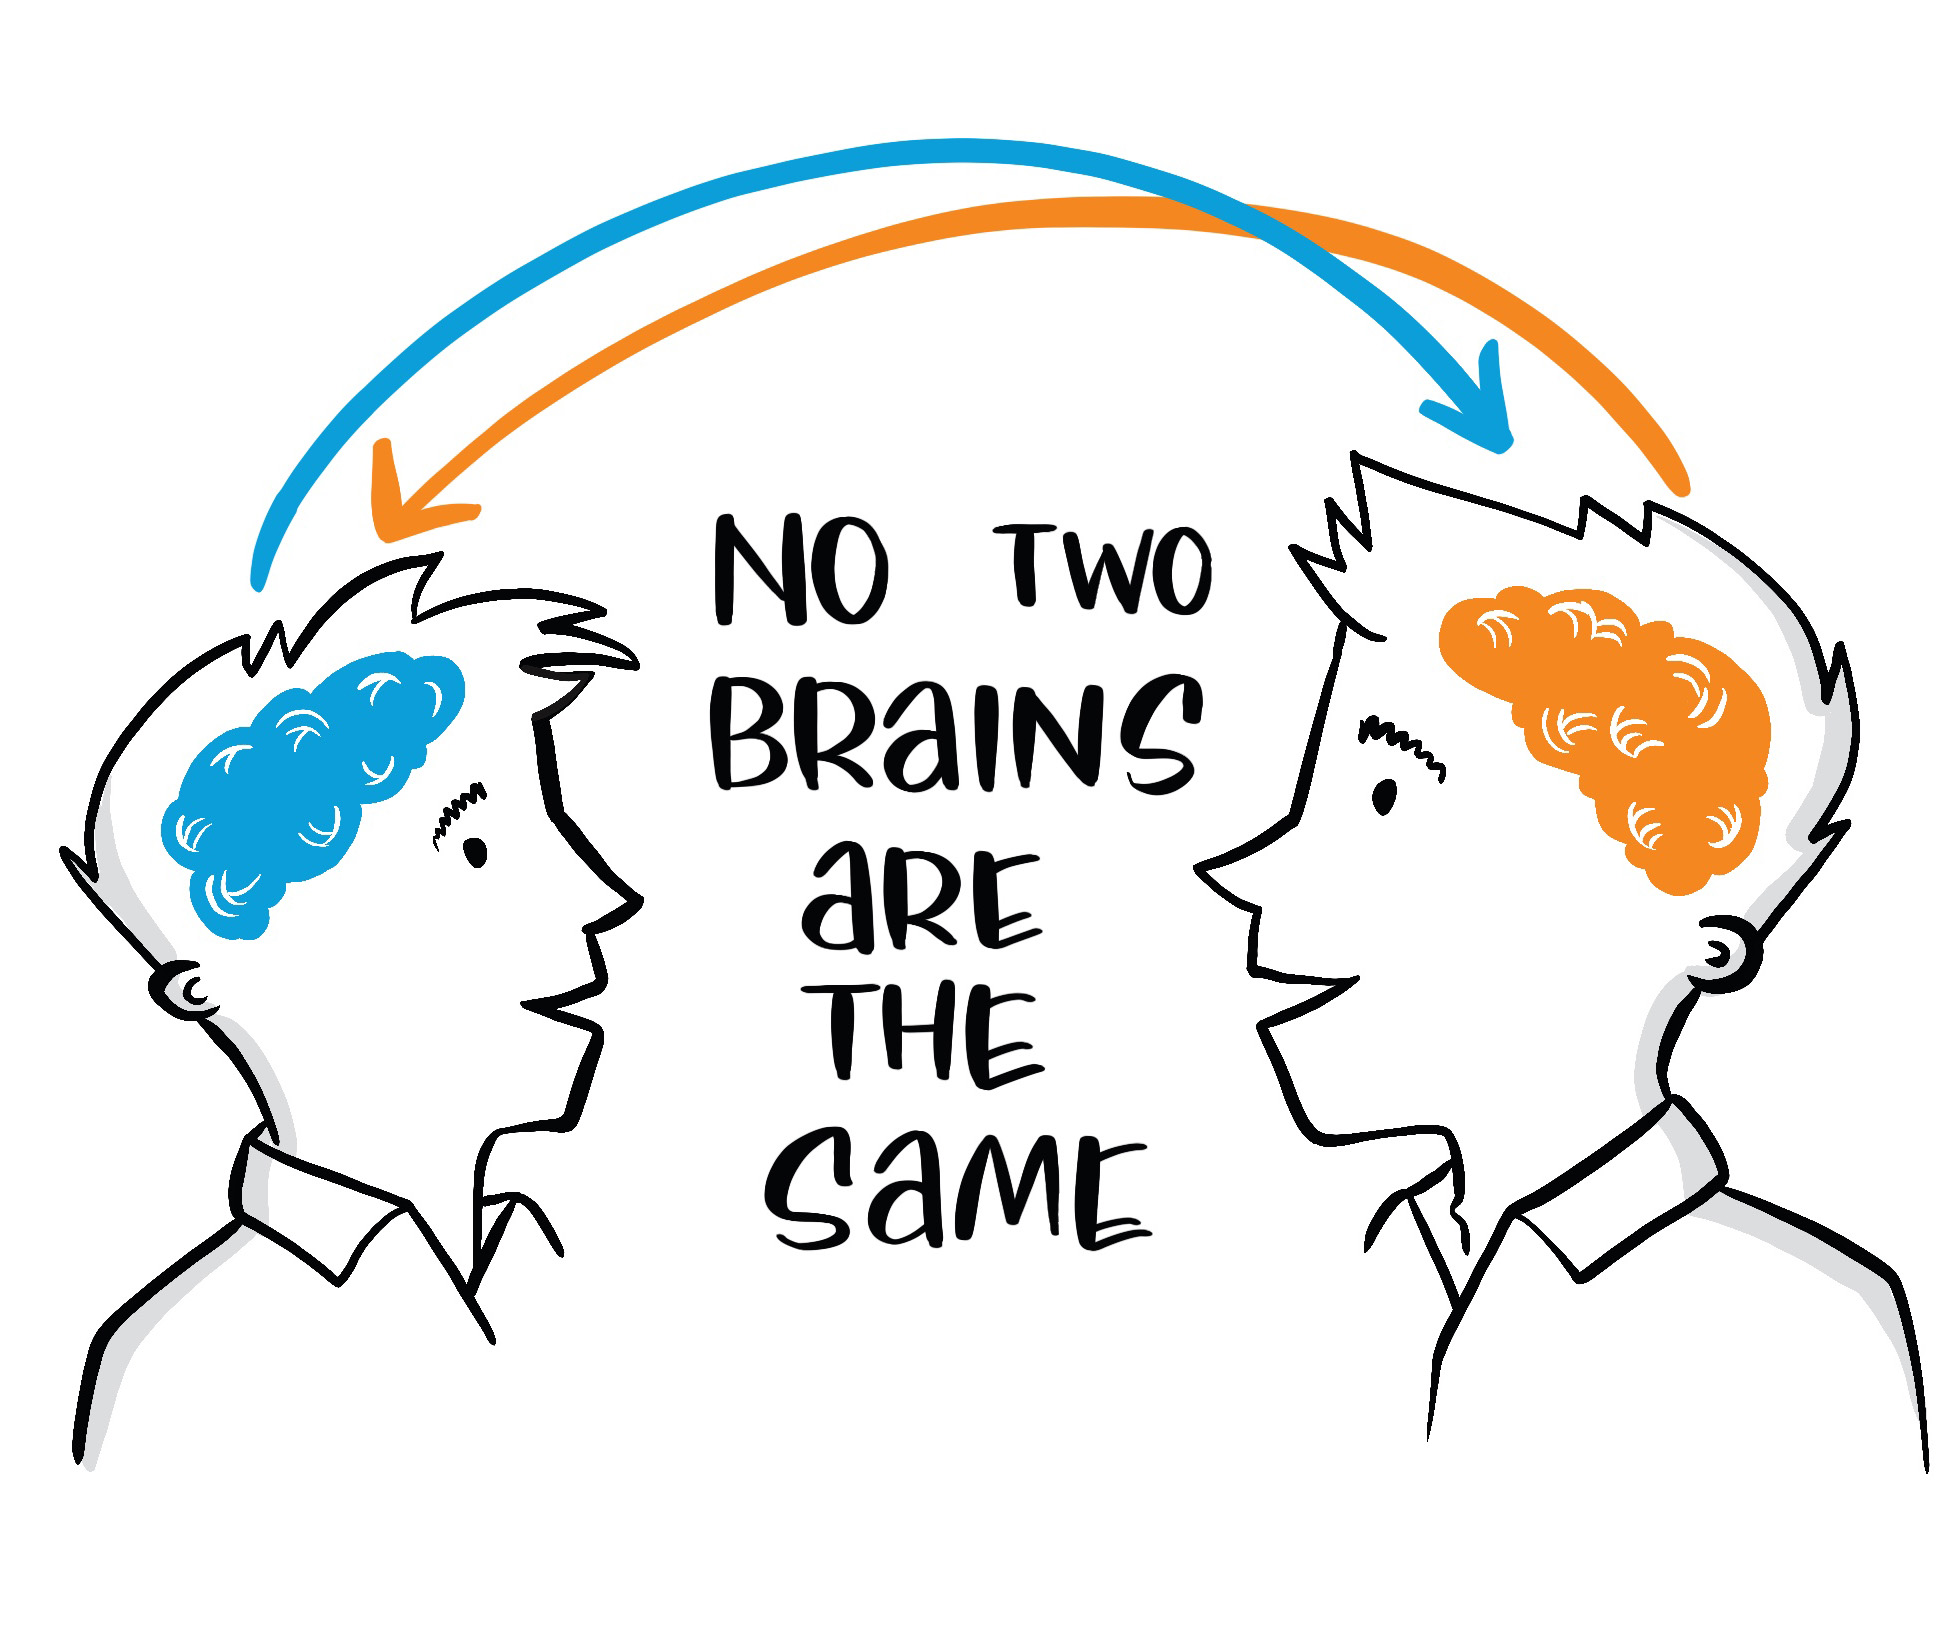 Illustration demonstrating no two brains are the same